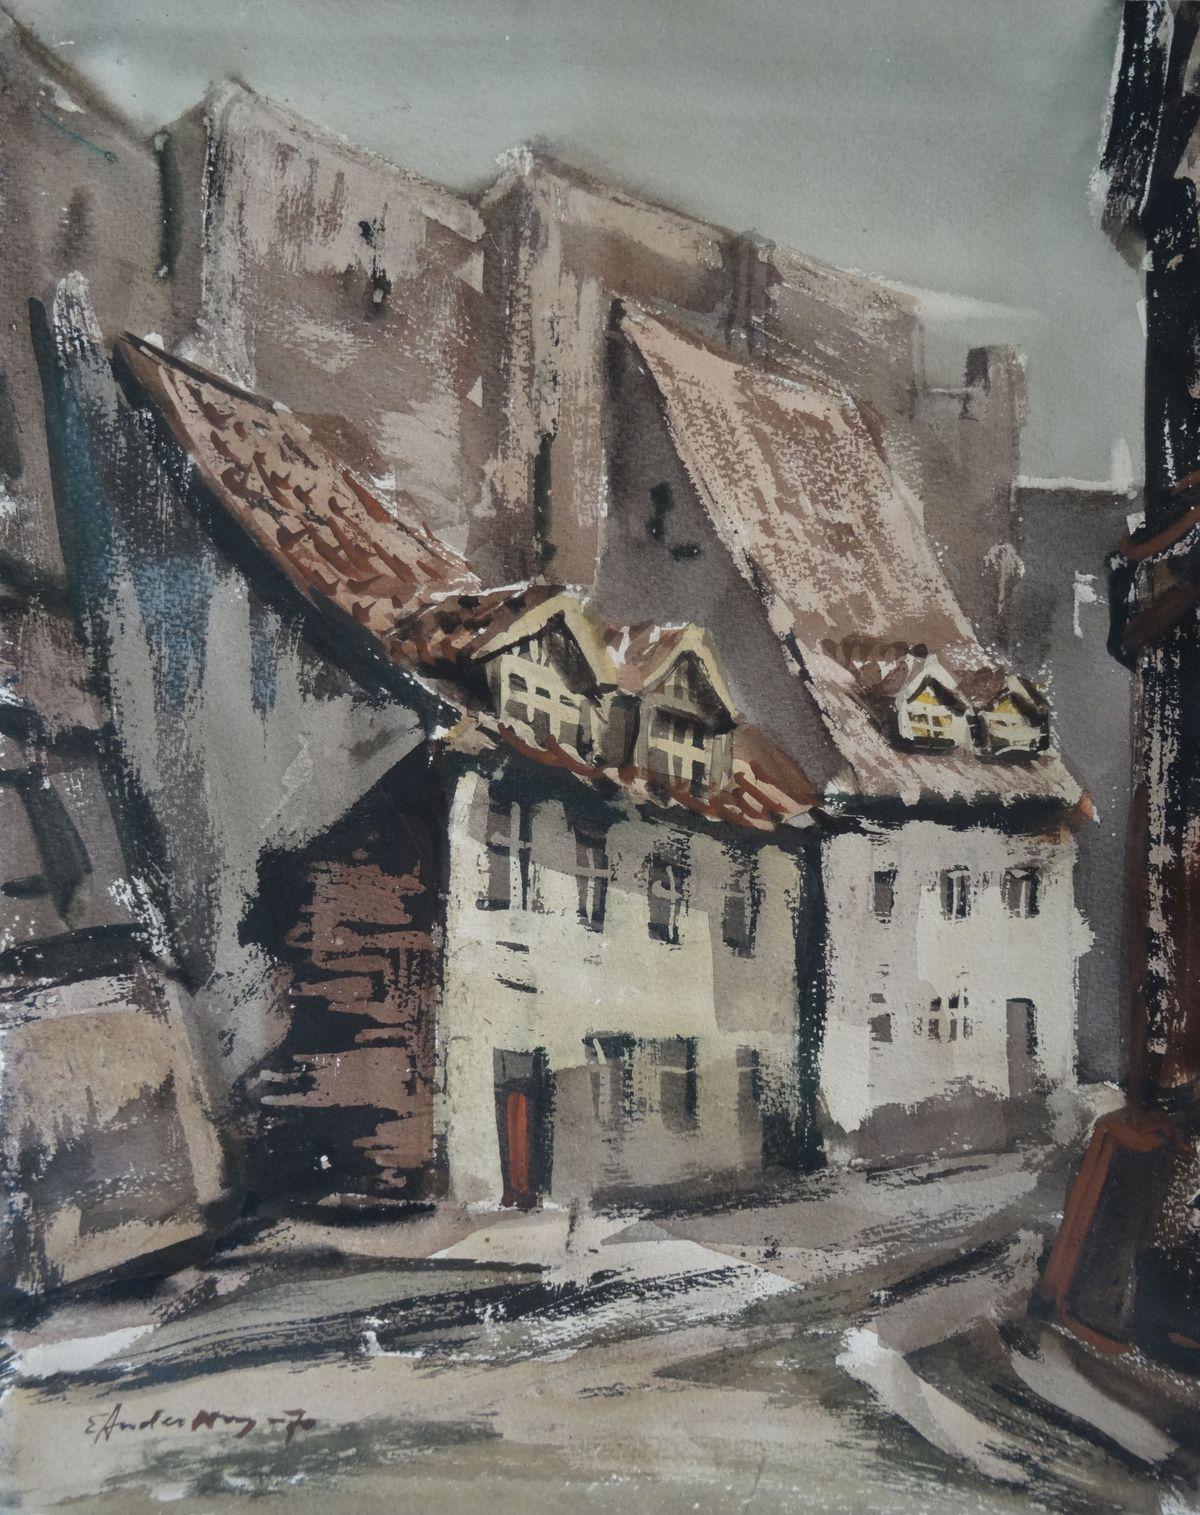 Edwin Andersons Landscape Painting - Old City. 1970. Paper, watercolor, 46x37 cm